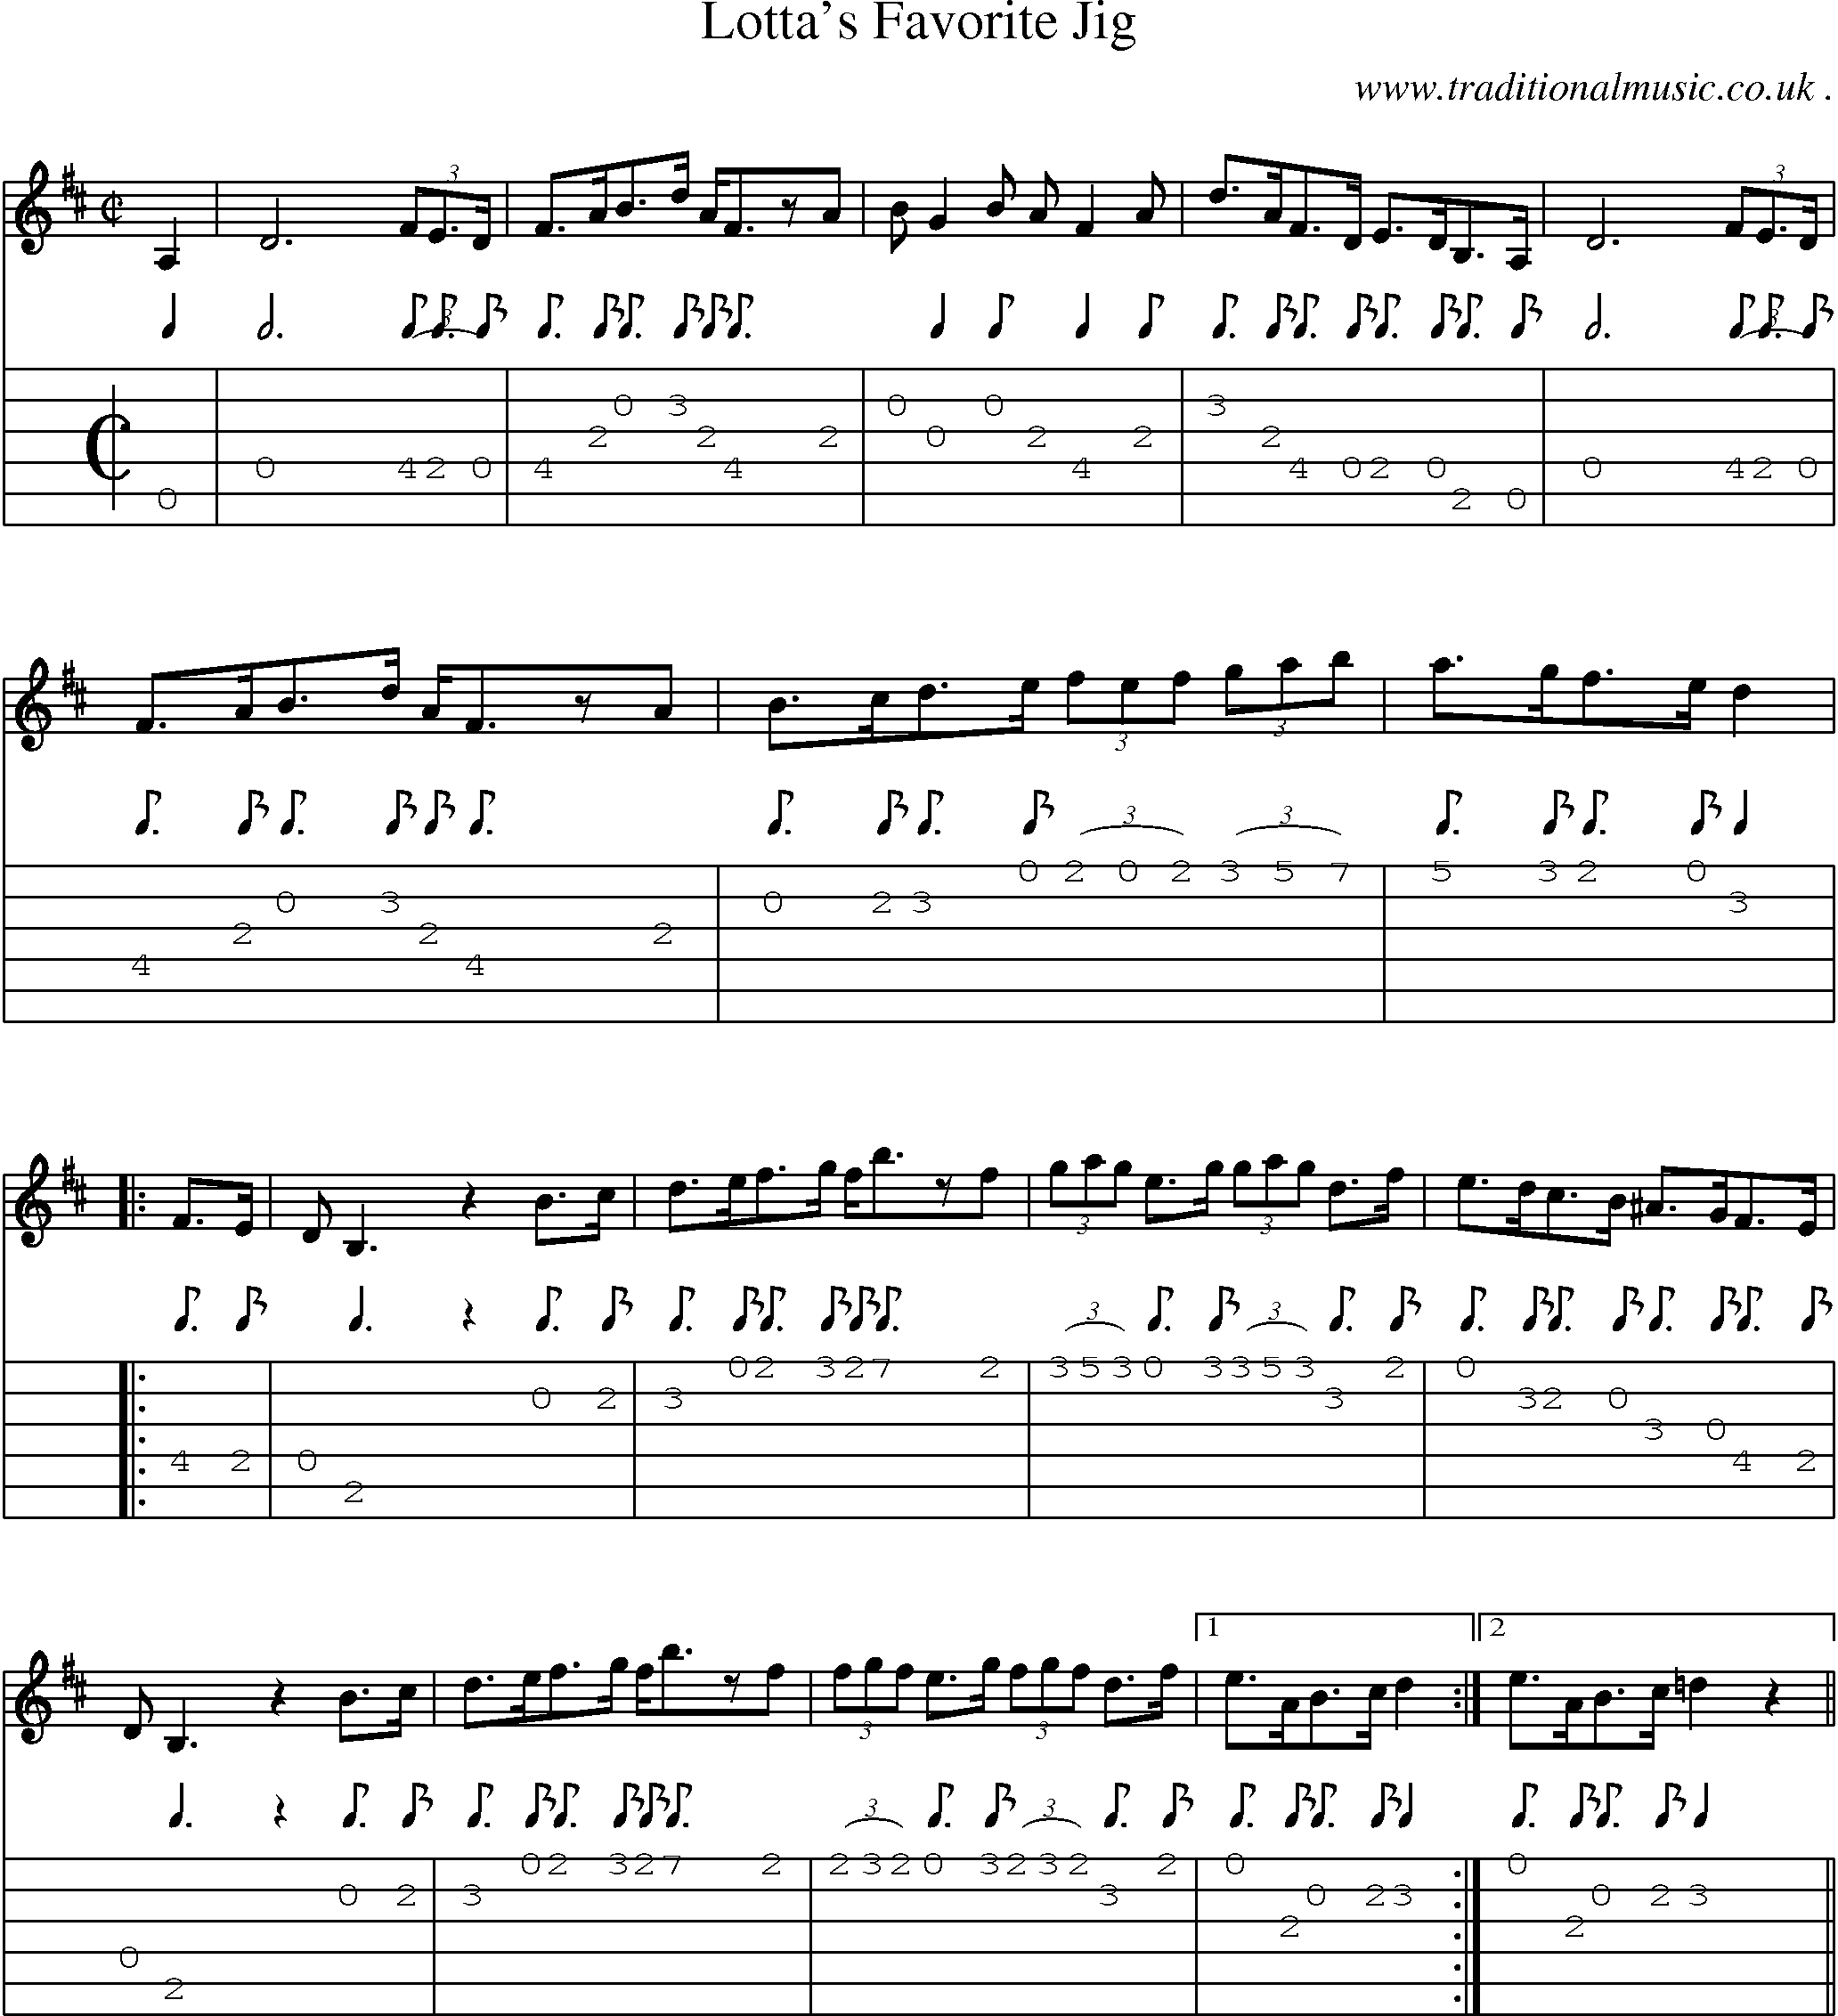 Sheet-Music and Guitar Tabs for Lottas Favorite Jig